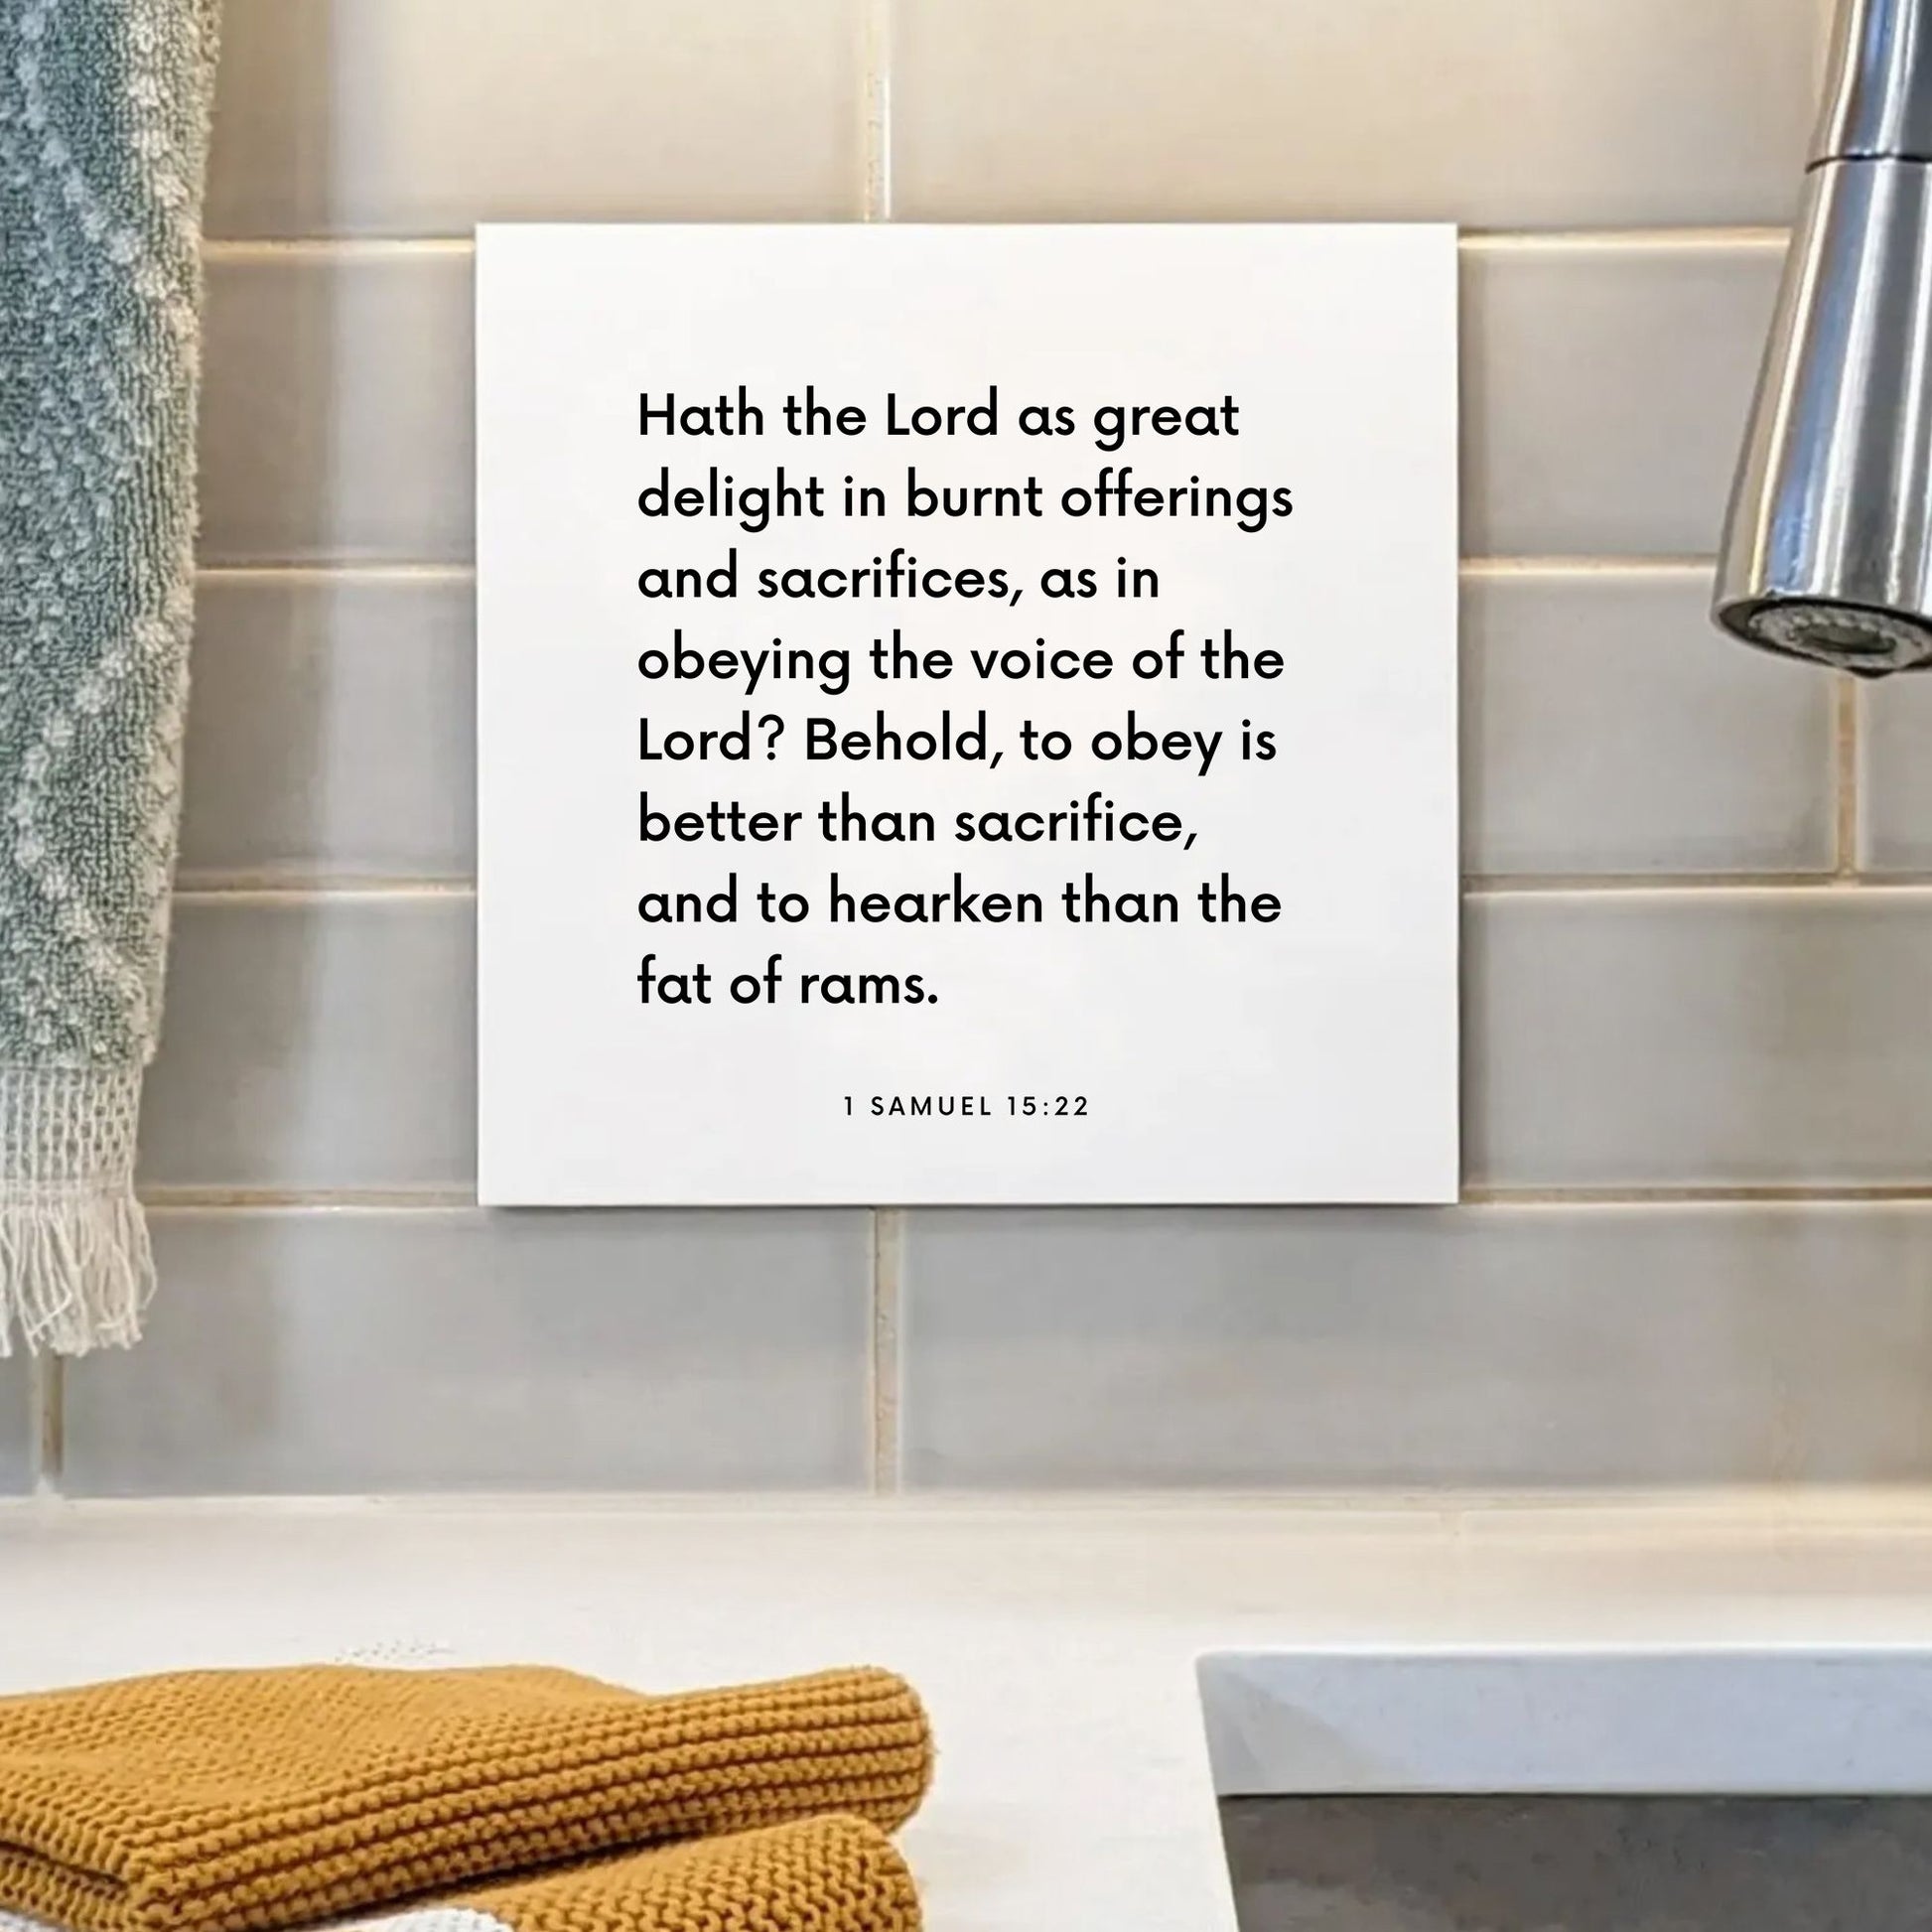 Sink mouting of the scripture tile for 1 Samuel 15:22 - "To obey is better than sacrifice"